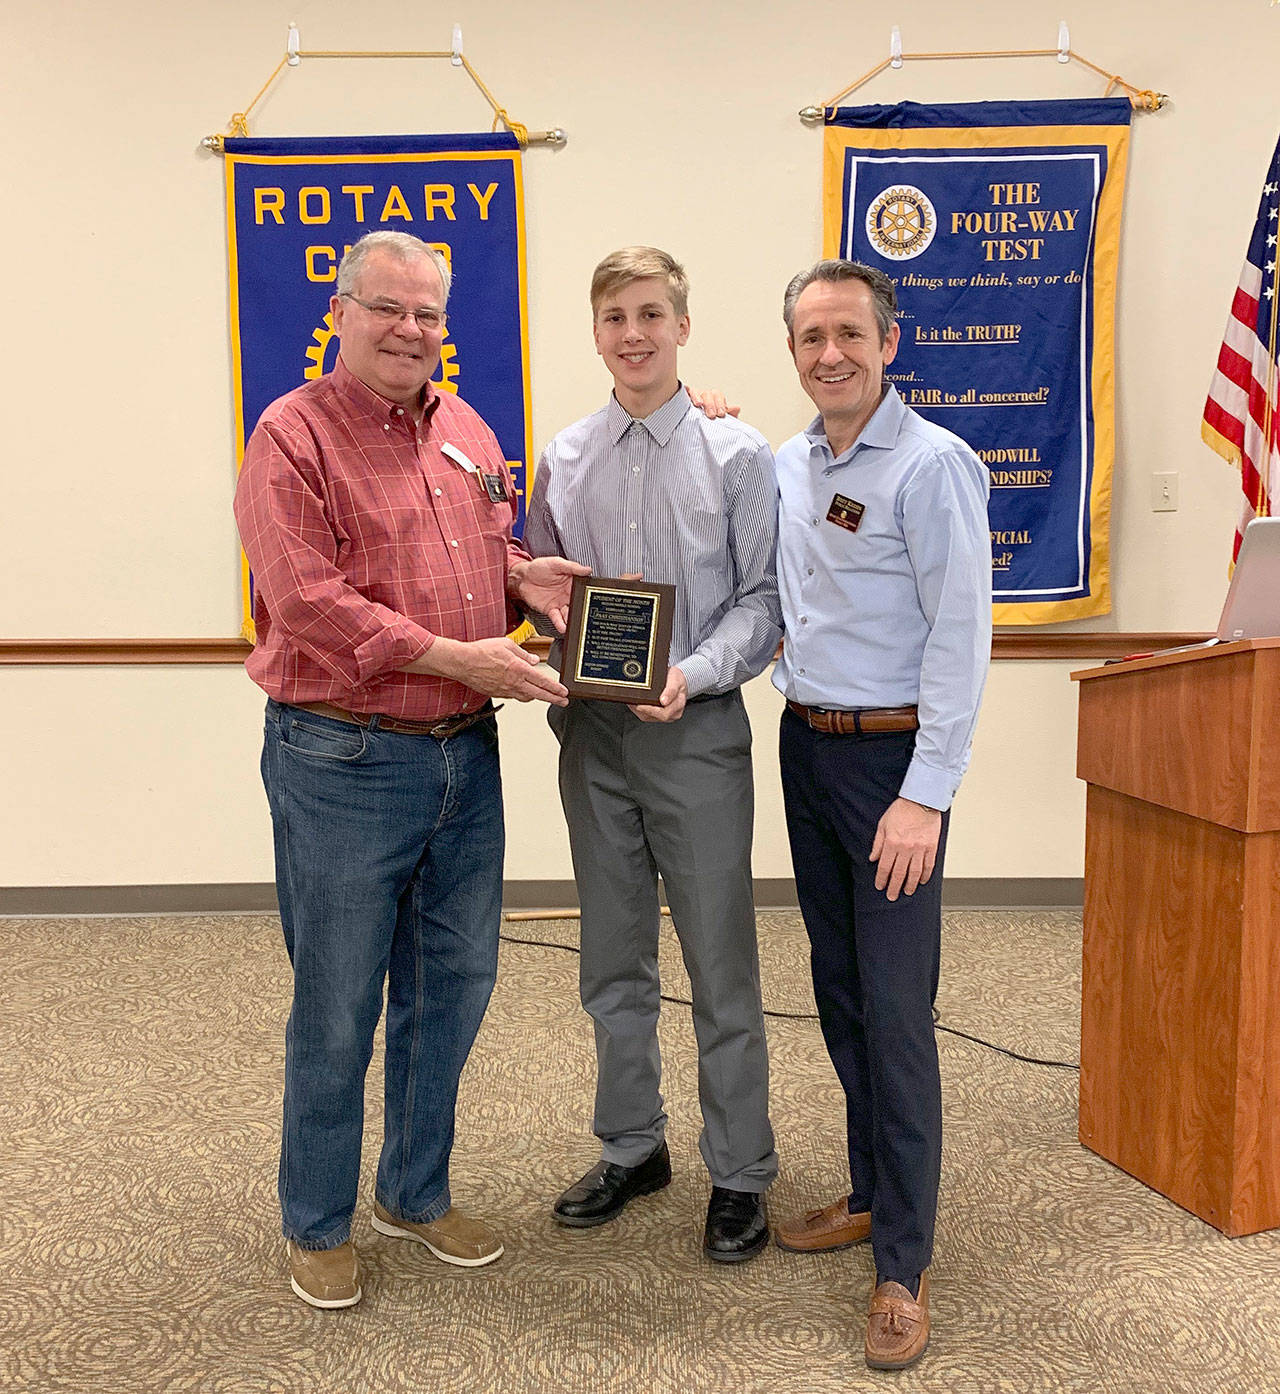 Milestone: Rotary honors Christianson with student honor